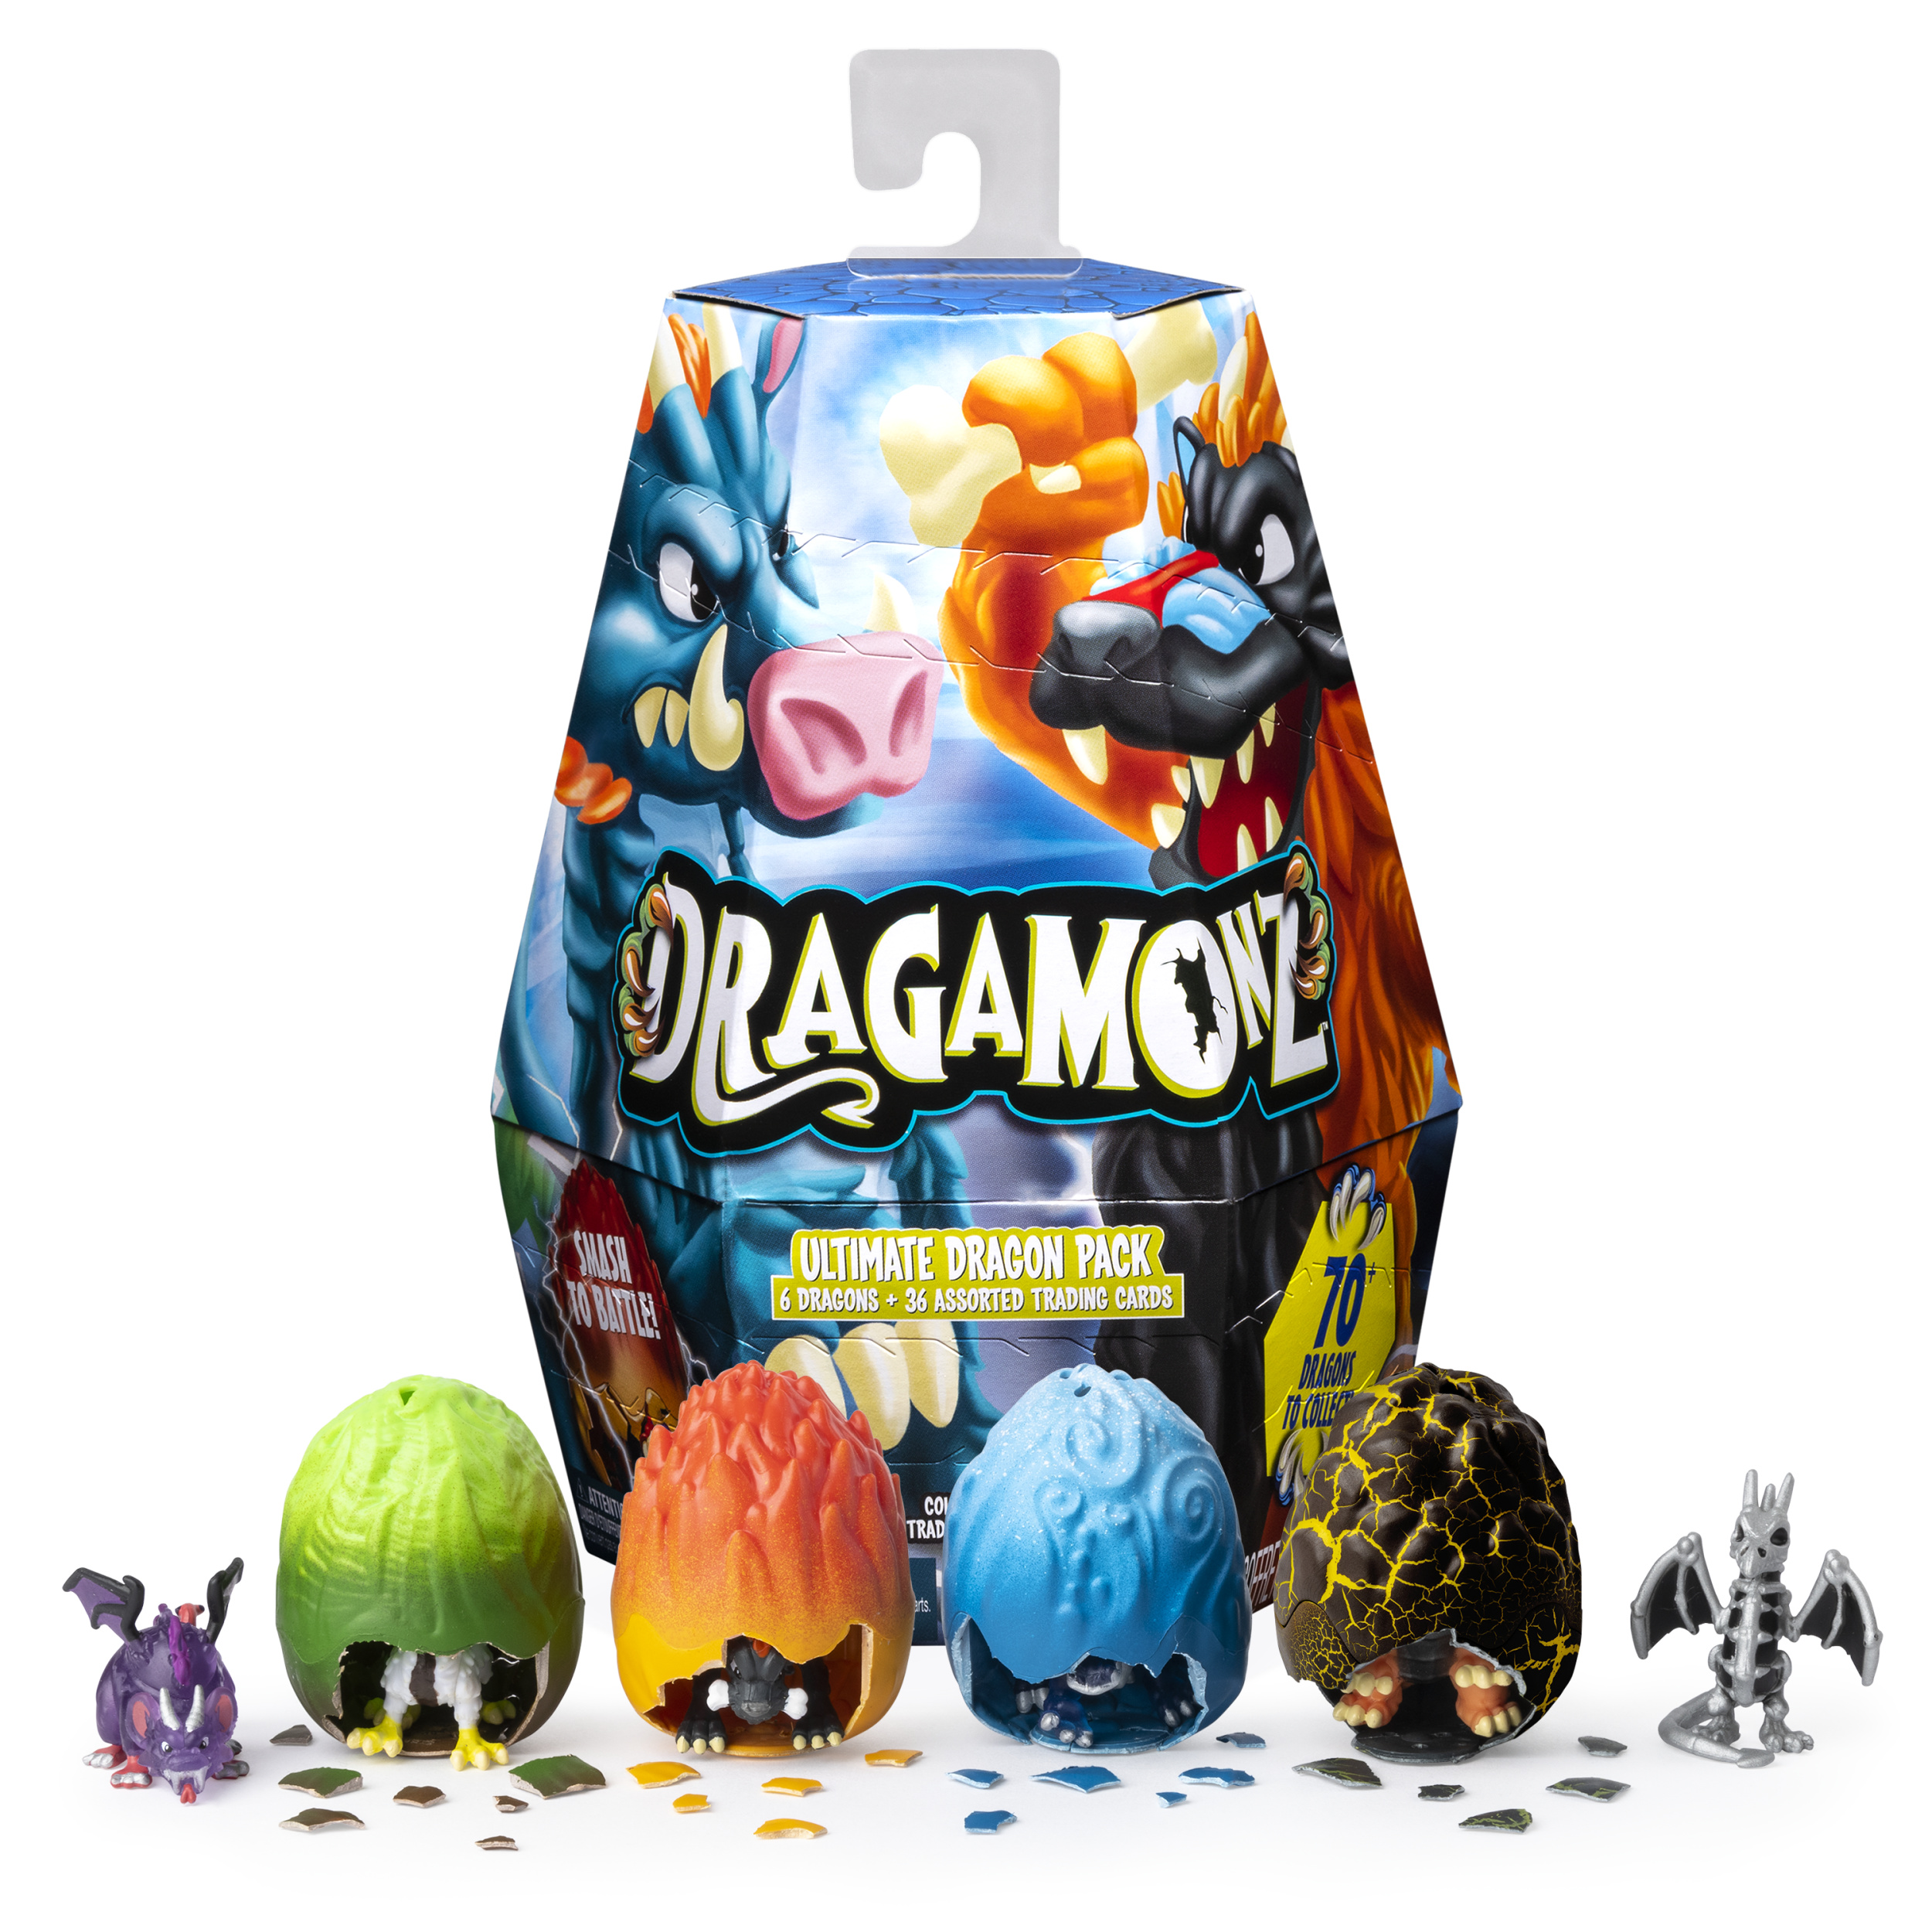 Dragamonz , Ultimate Dragon 6-Pack, Collectible Figure and Trading Card Game, for Kids Aged 5 and Up